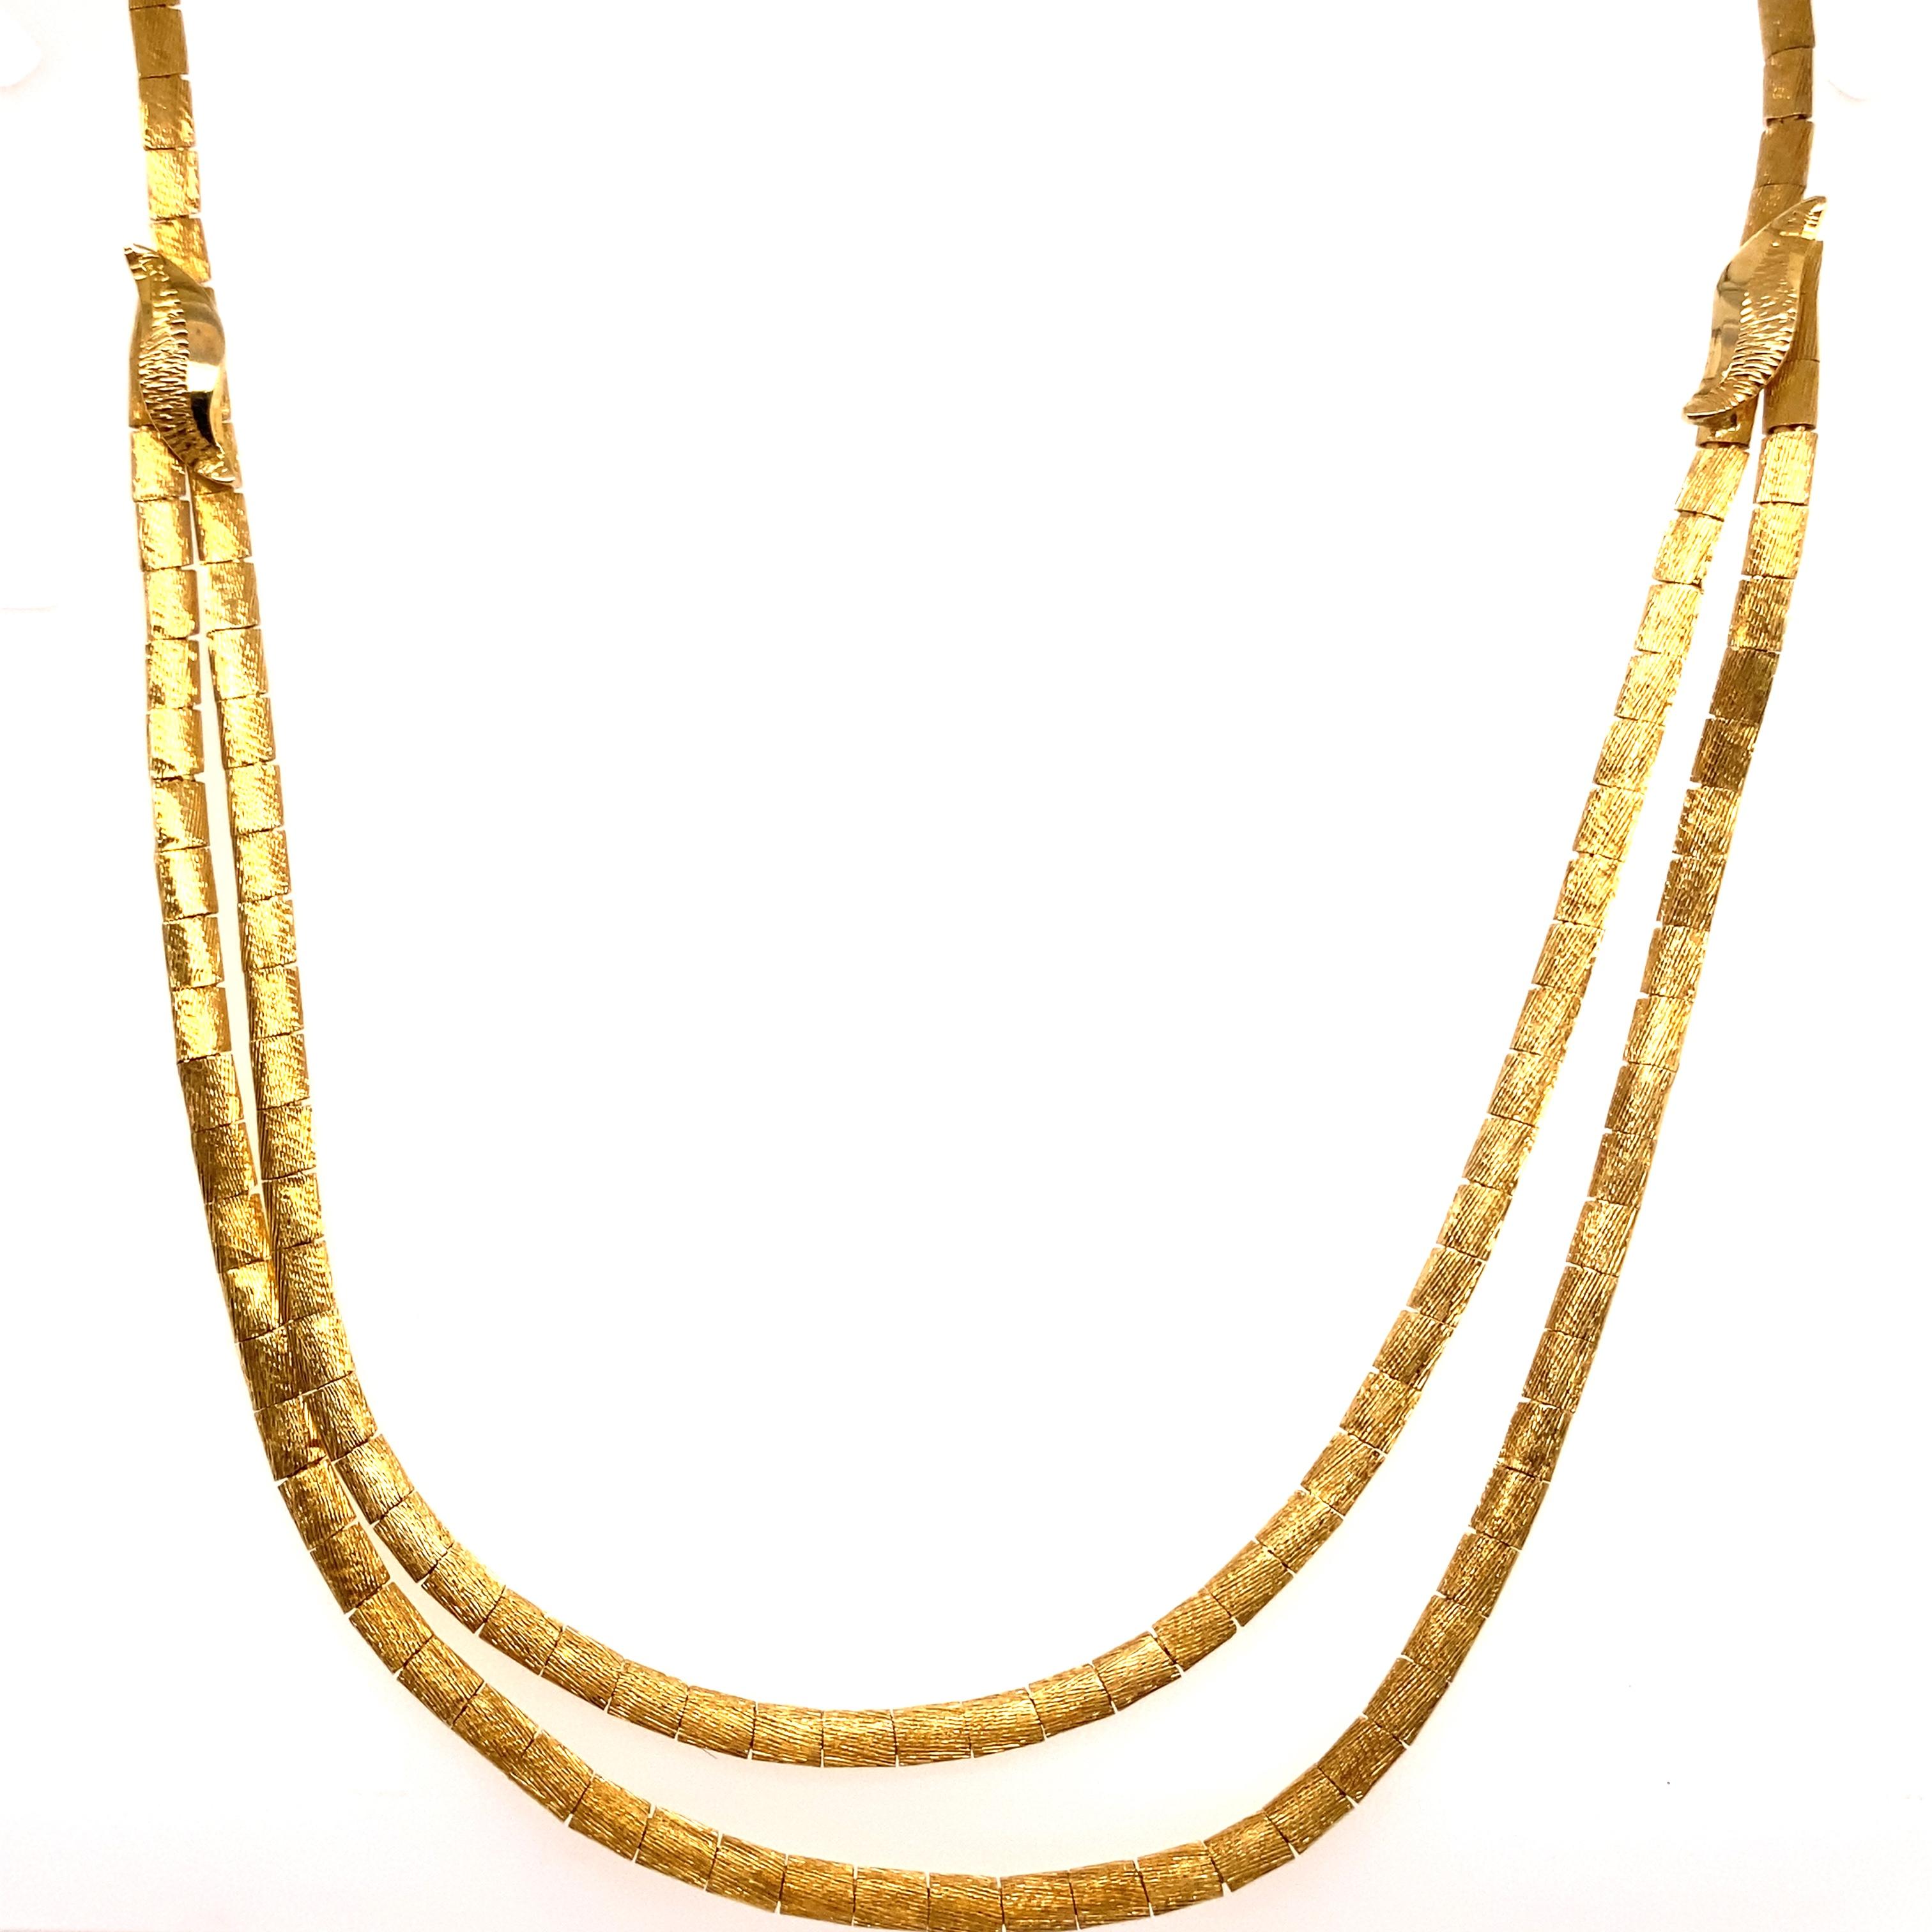 Vintage 1980's 18K Yellow Gold Omega Layered Necklace - The 18K gold links are 2.7mm wide with a brushed finish. The layered chain is attached with a leaf design link and the clasp is a plunger style with a figure 8 safety. The length of the